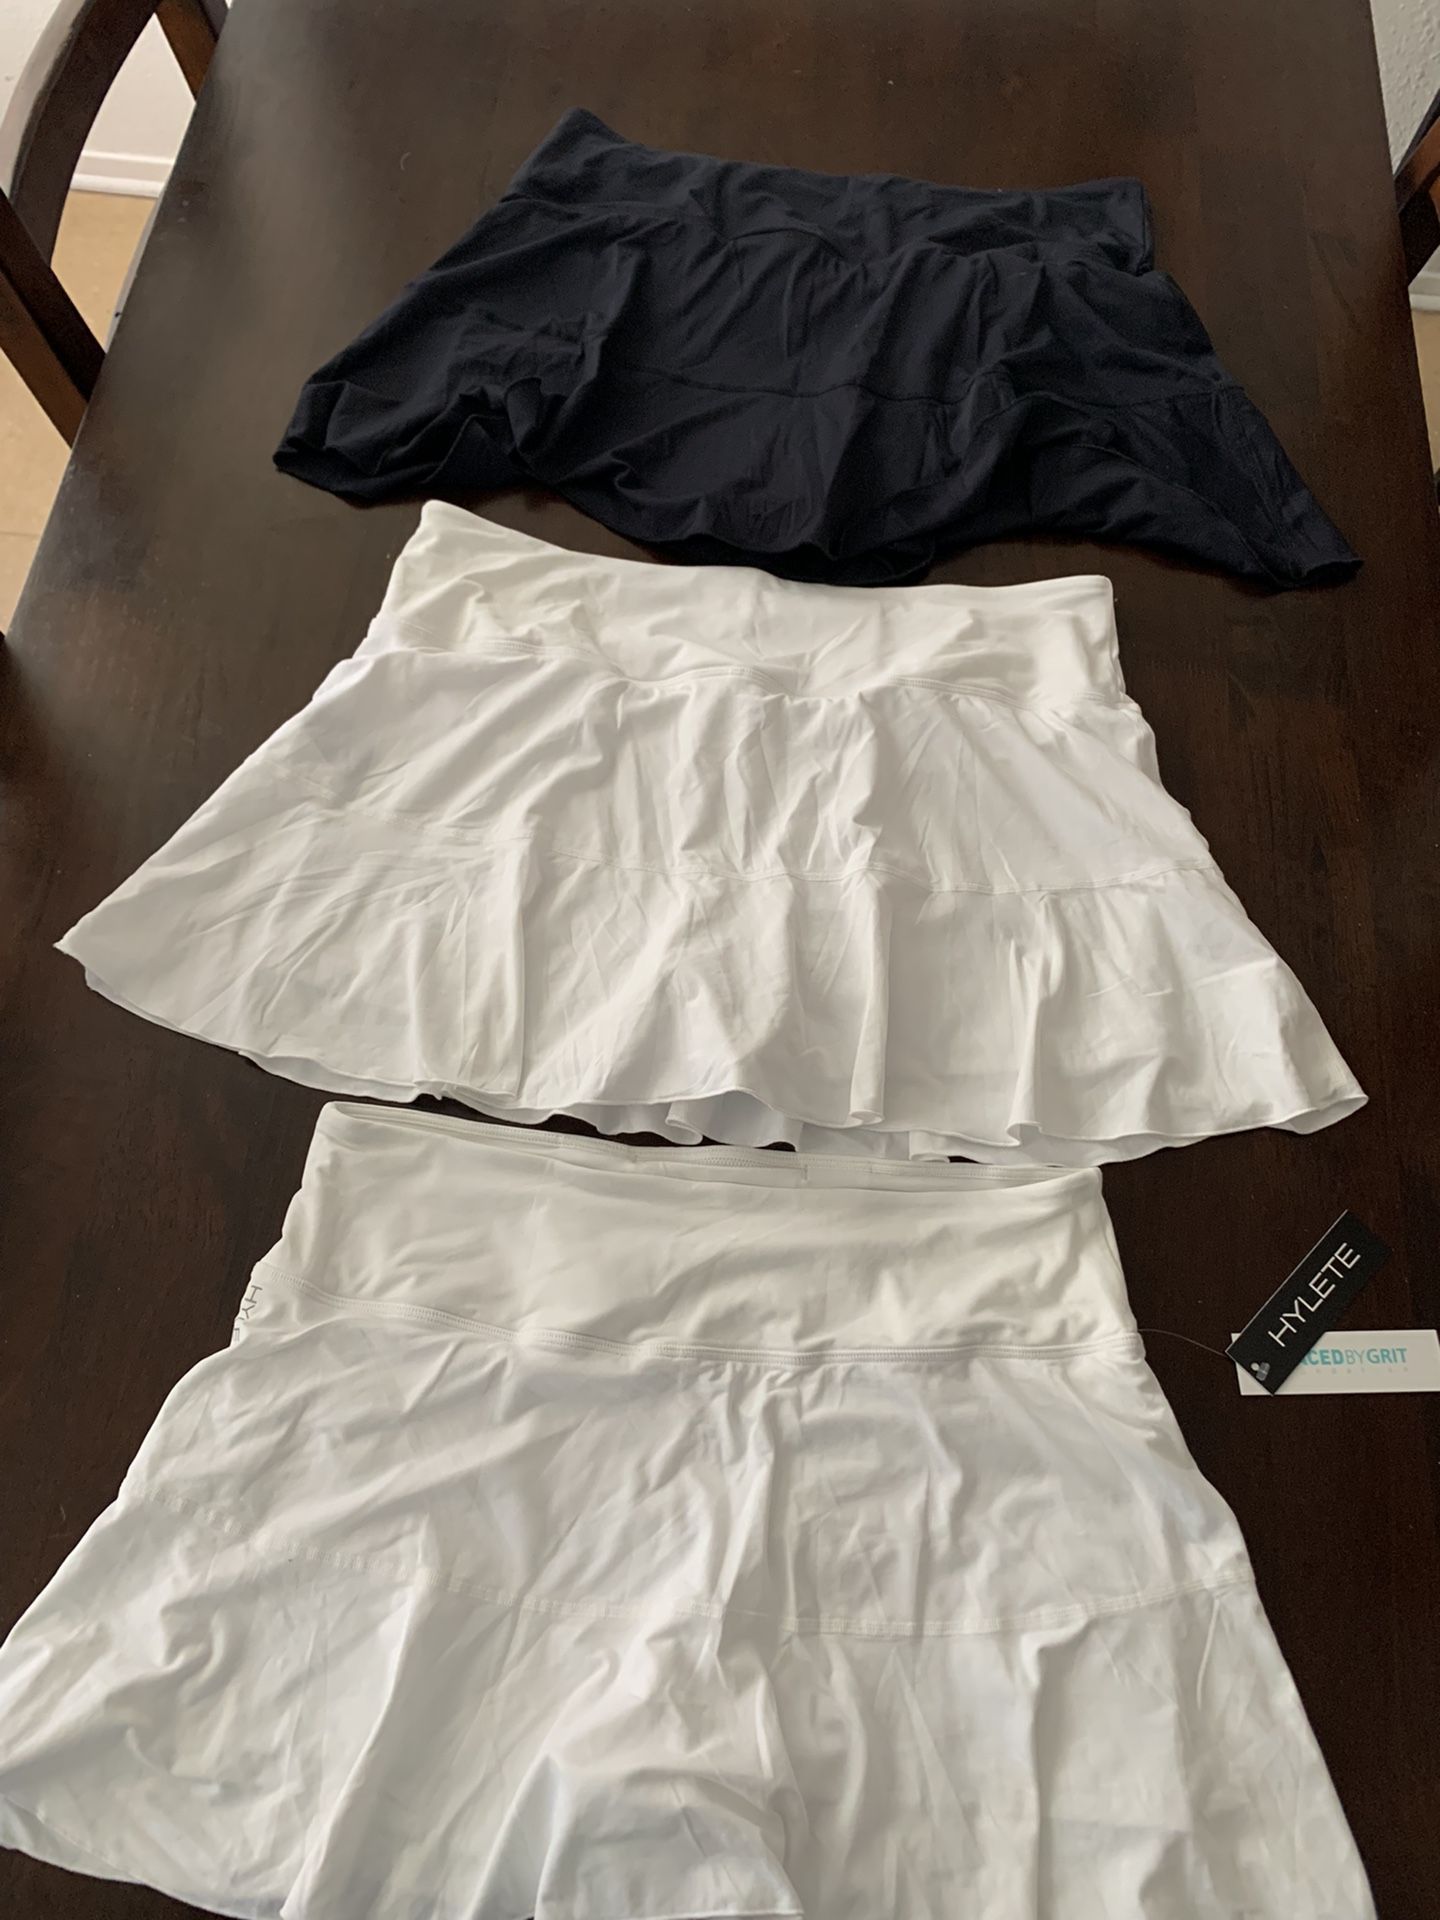 Skirts LG 3 For $10